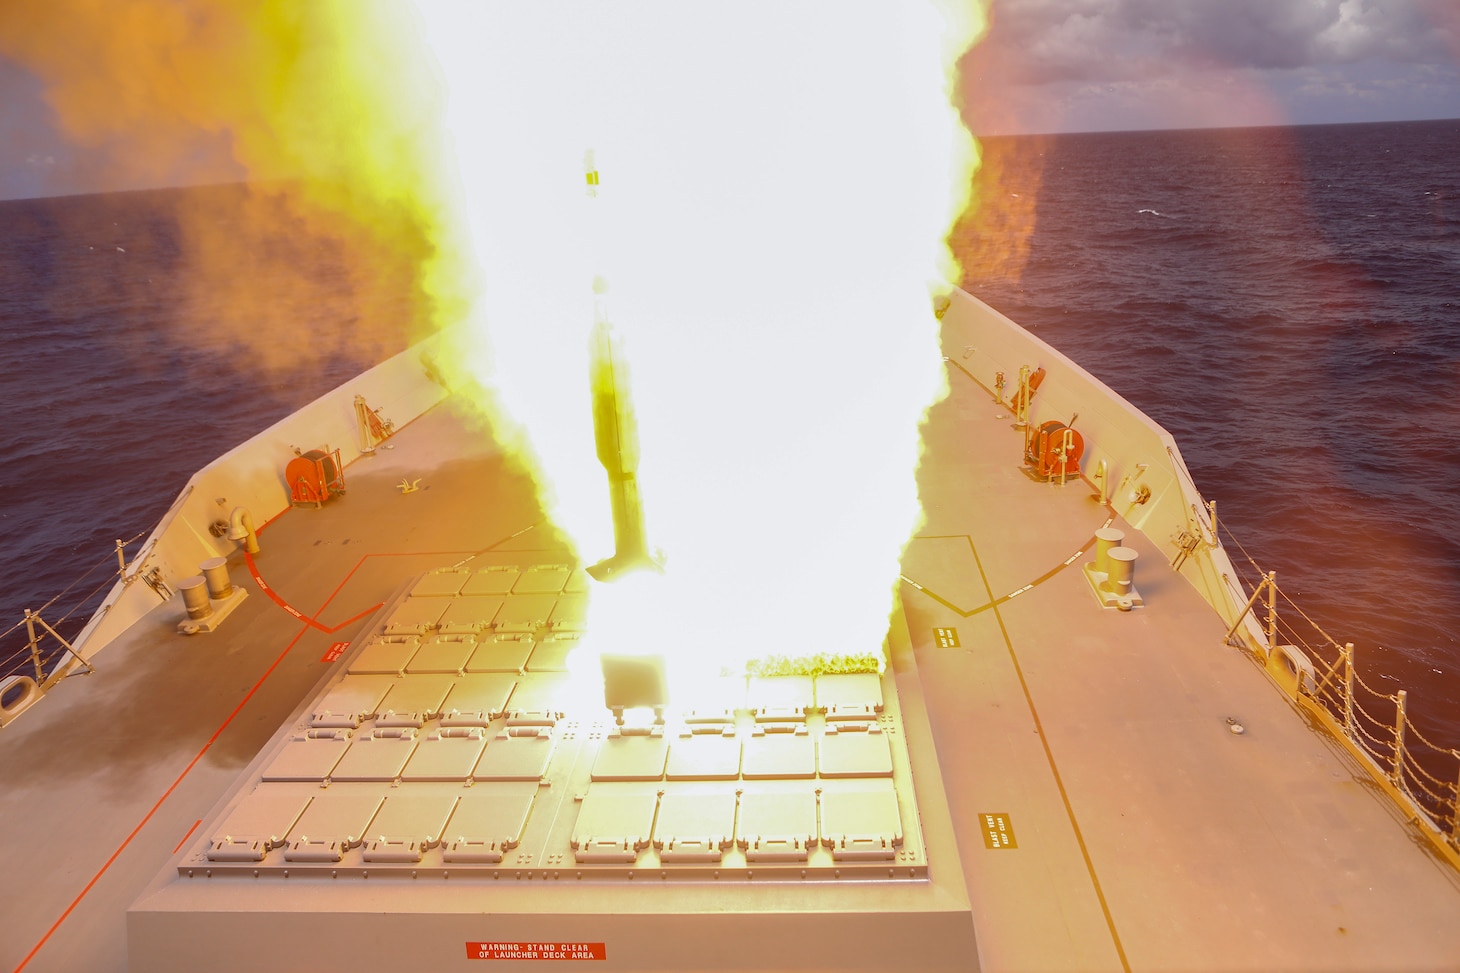 Royal Australian Navy ship HMAS Hobart (DDG 39) executes a live missile firing during Exercise Rim of the Pacific (RIMPAC).